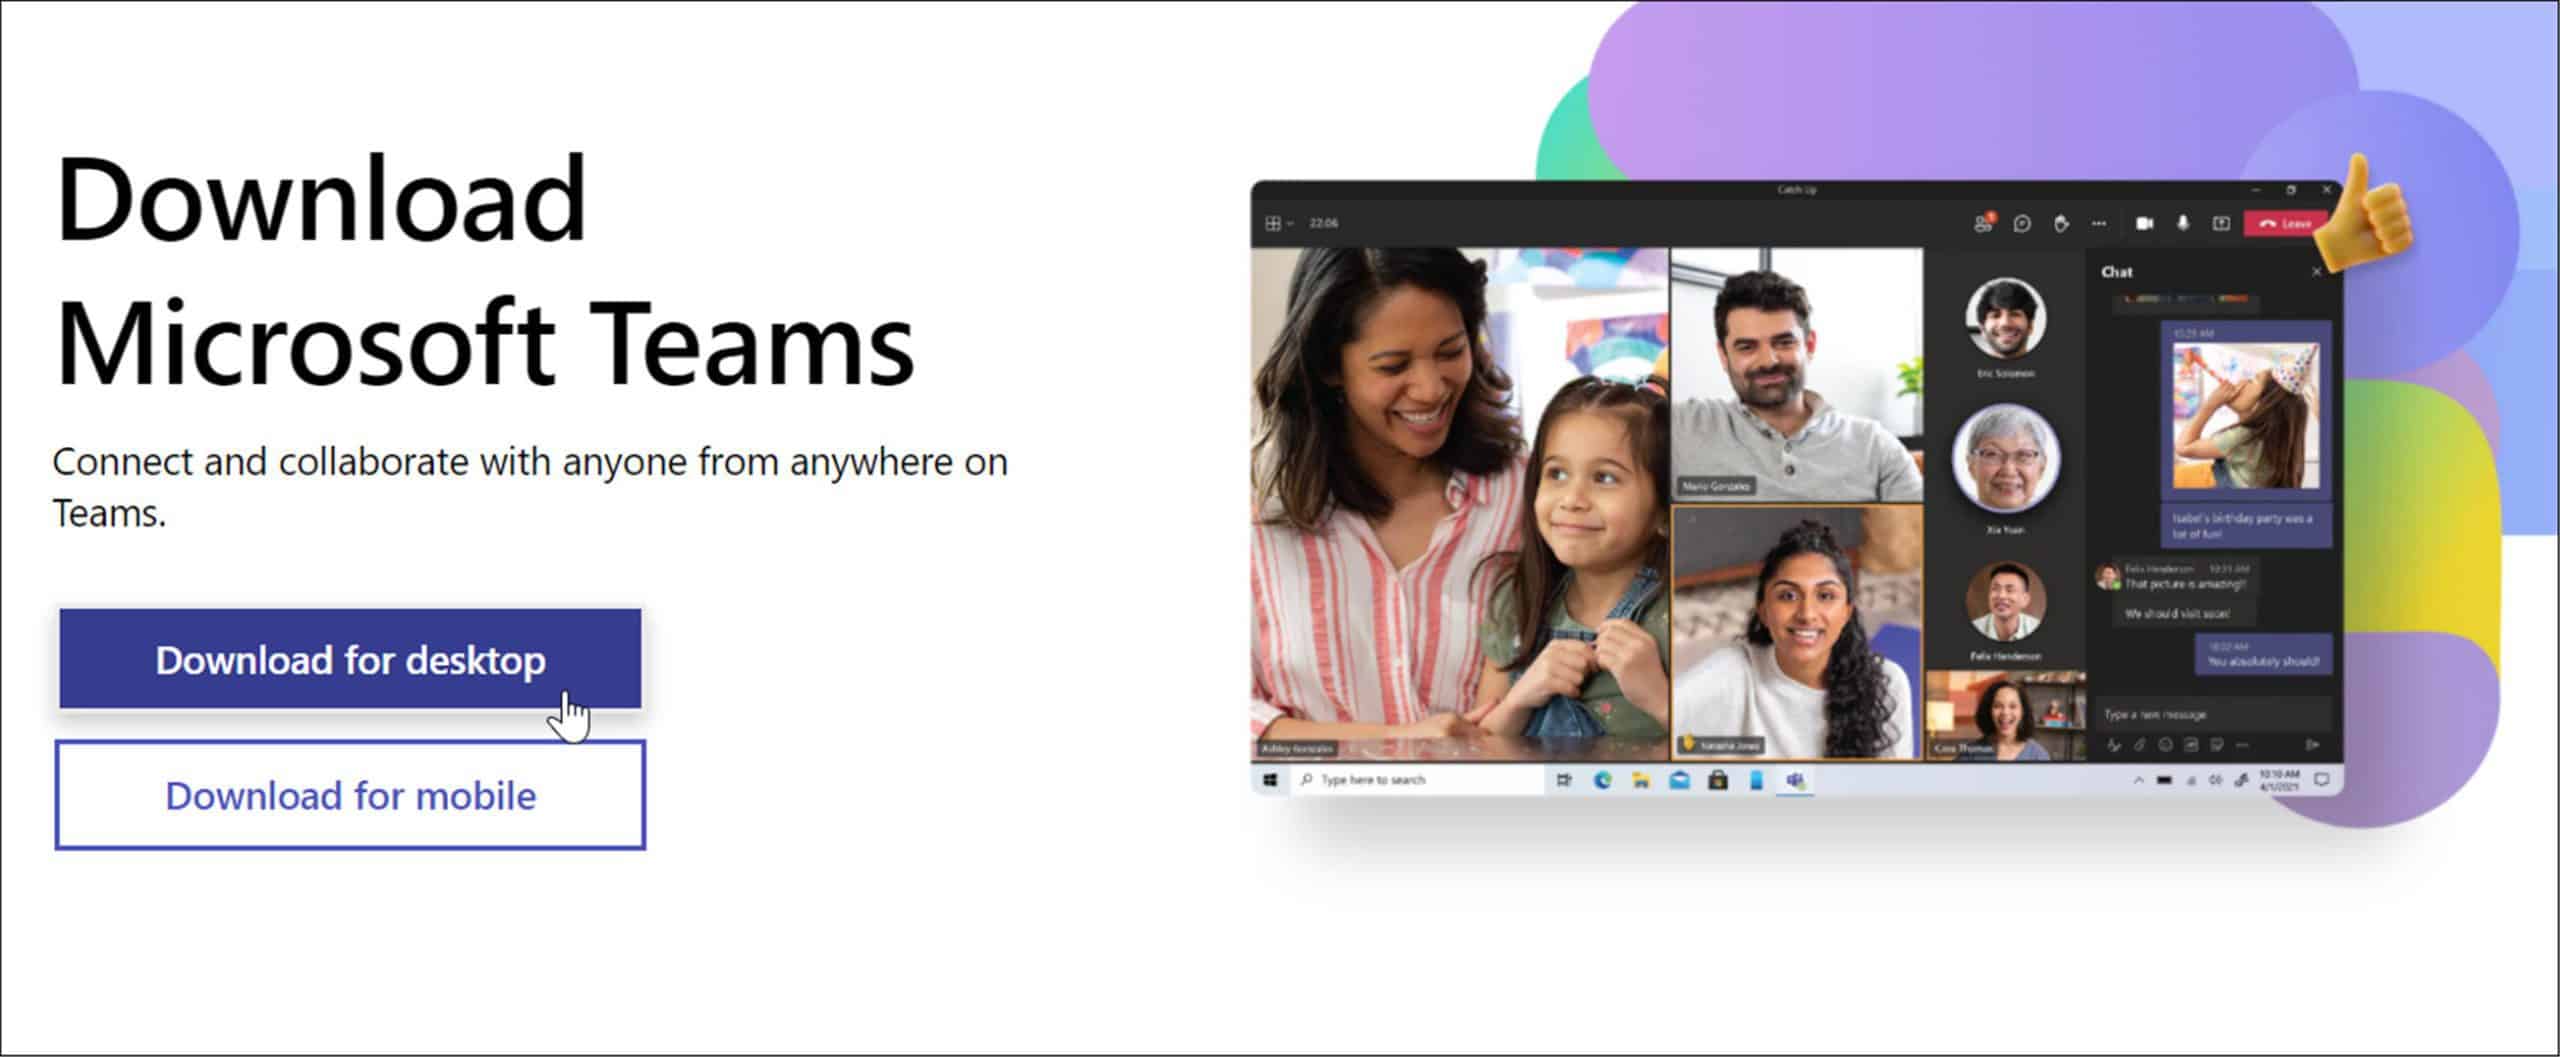 Microsoft-Teams-download-page-scaled-1